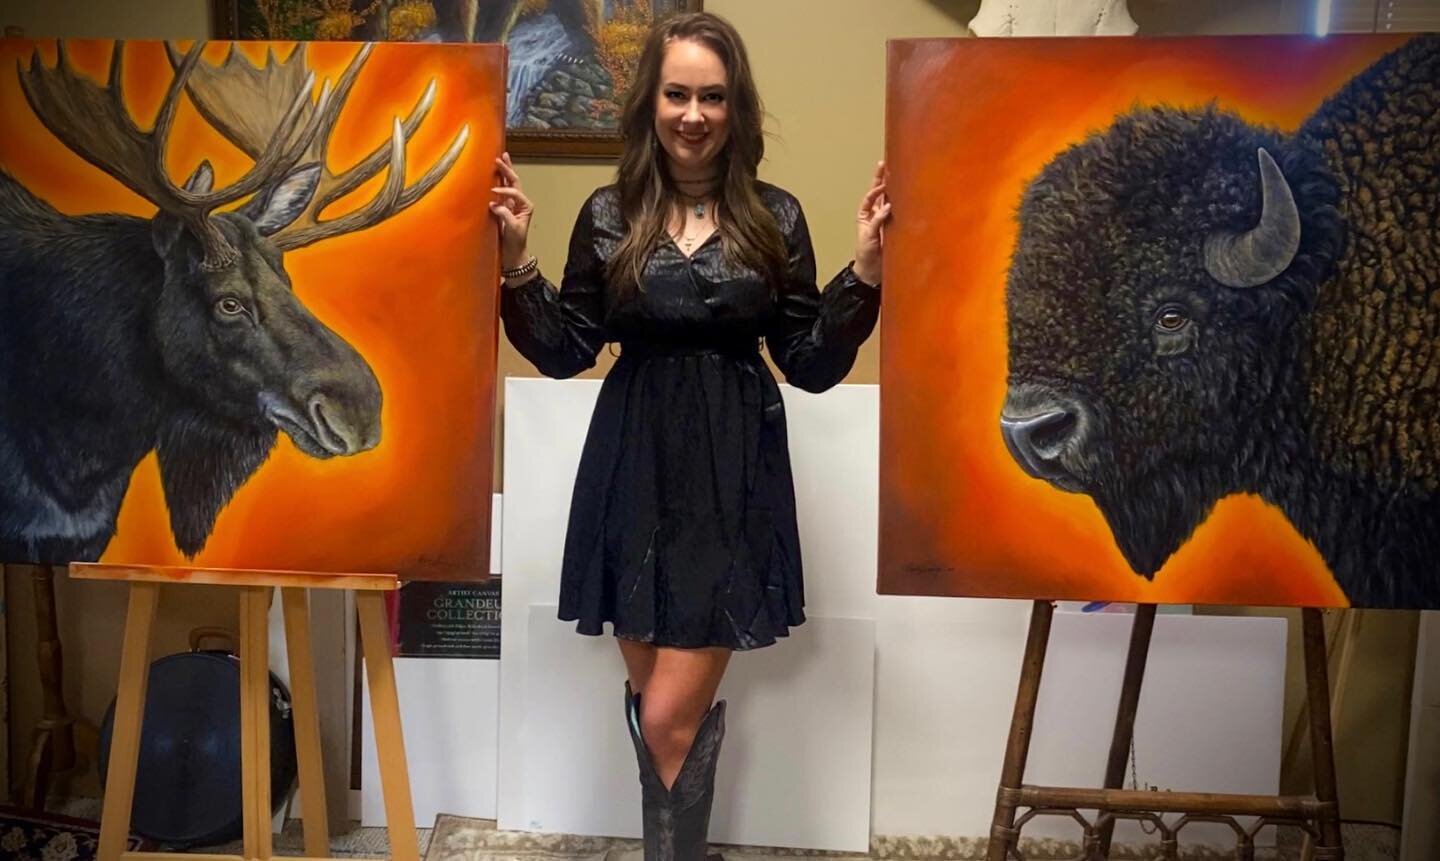 I&rsquo;m excited to share this pair! 🔥
Come see them in person at the Generations 2022 Art Show next weekend!

&ldquo;Bull&rsquo;s Eye&rdquo; and &ldquo;Ton of Bull&rdquo; - 36&rdquo;x36&rdquo; original oil on canvas 

#art #artist #bison #billings